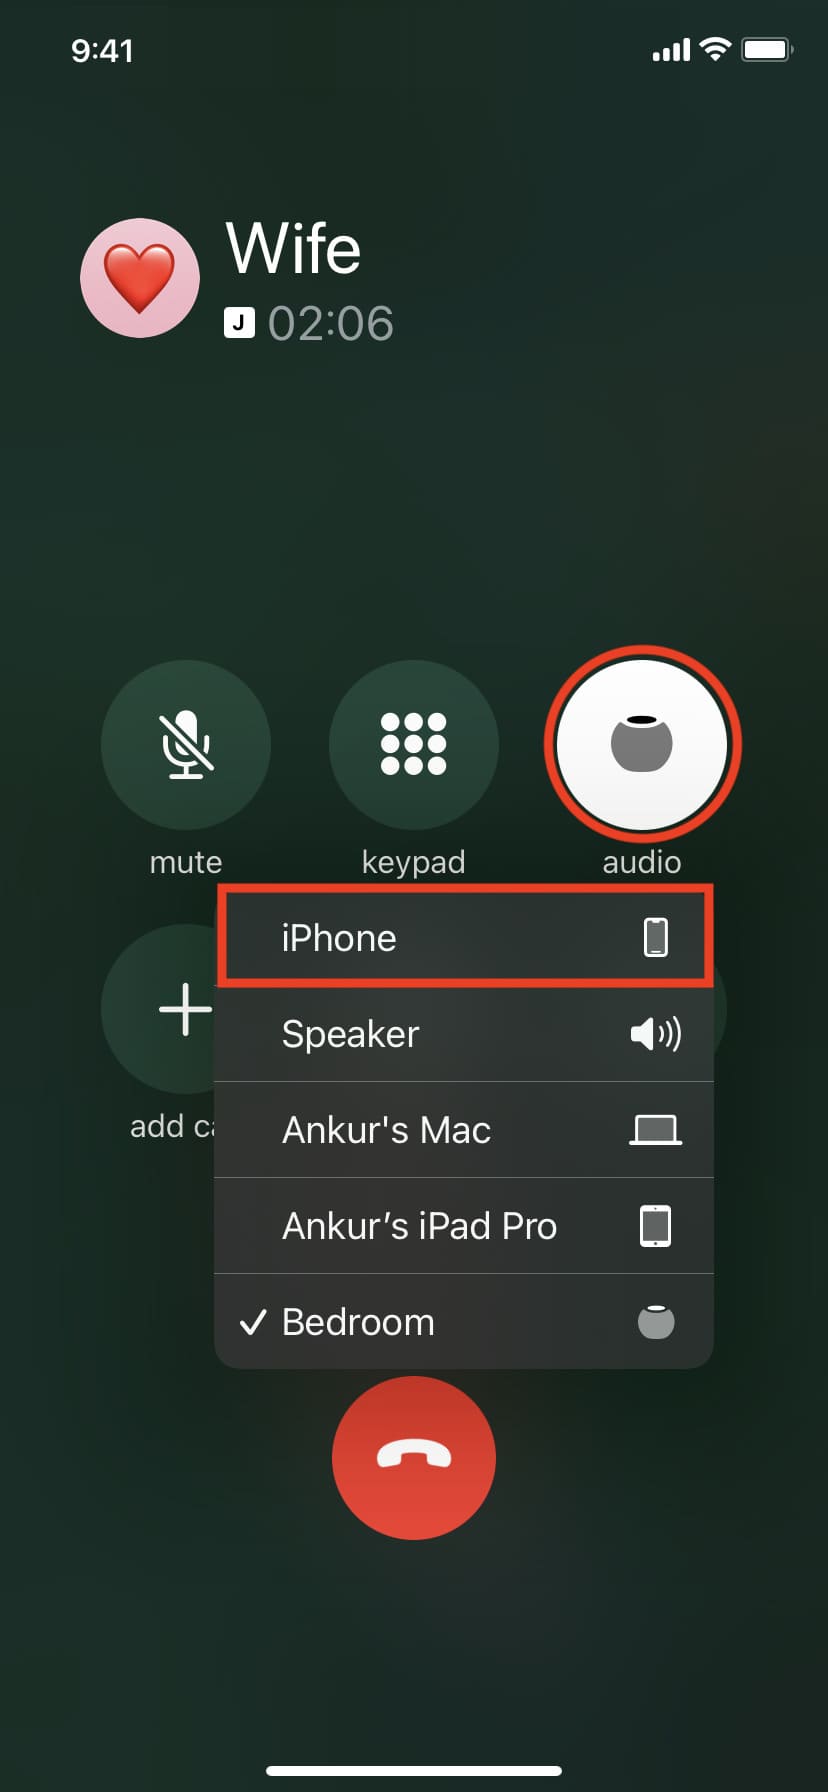 Move phone call from HomePod to iPhone